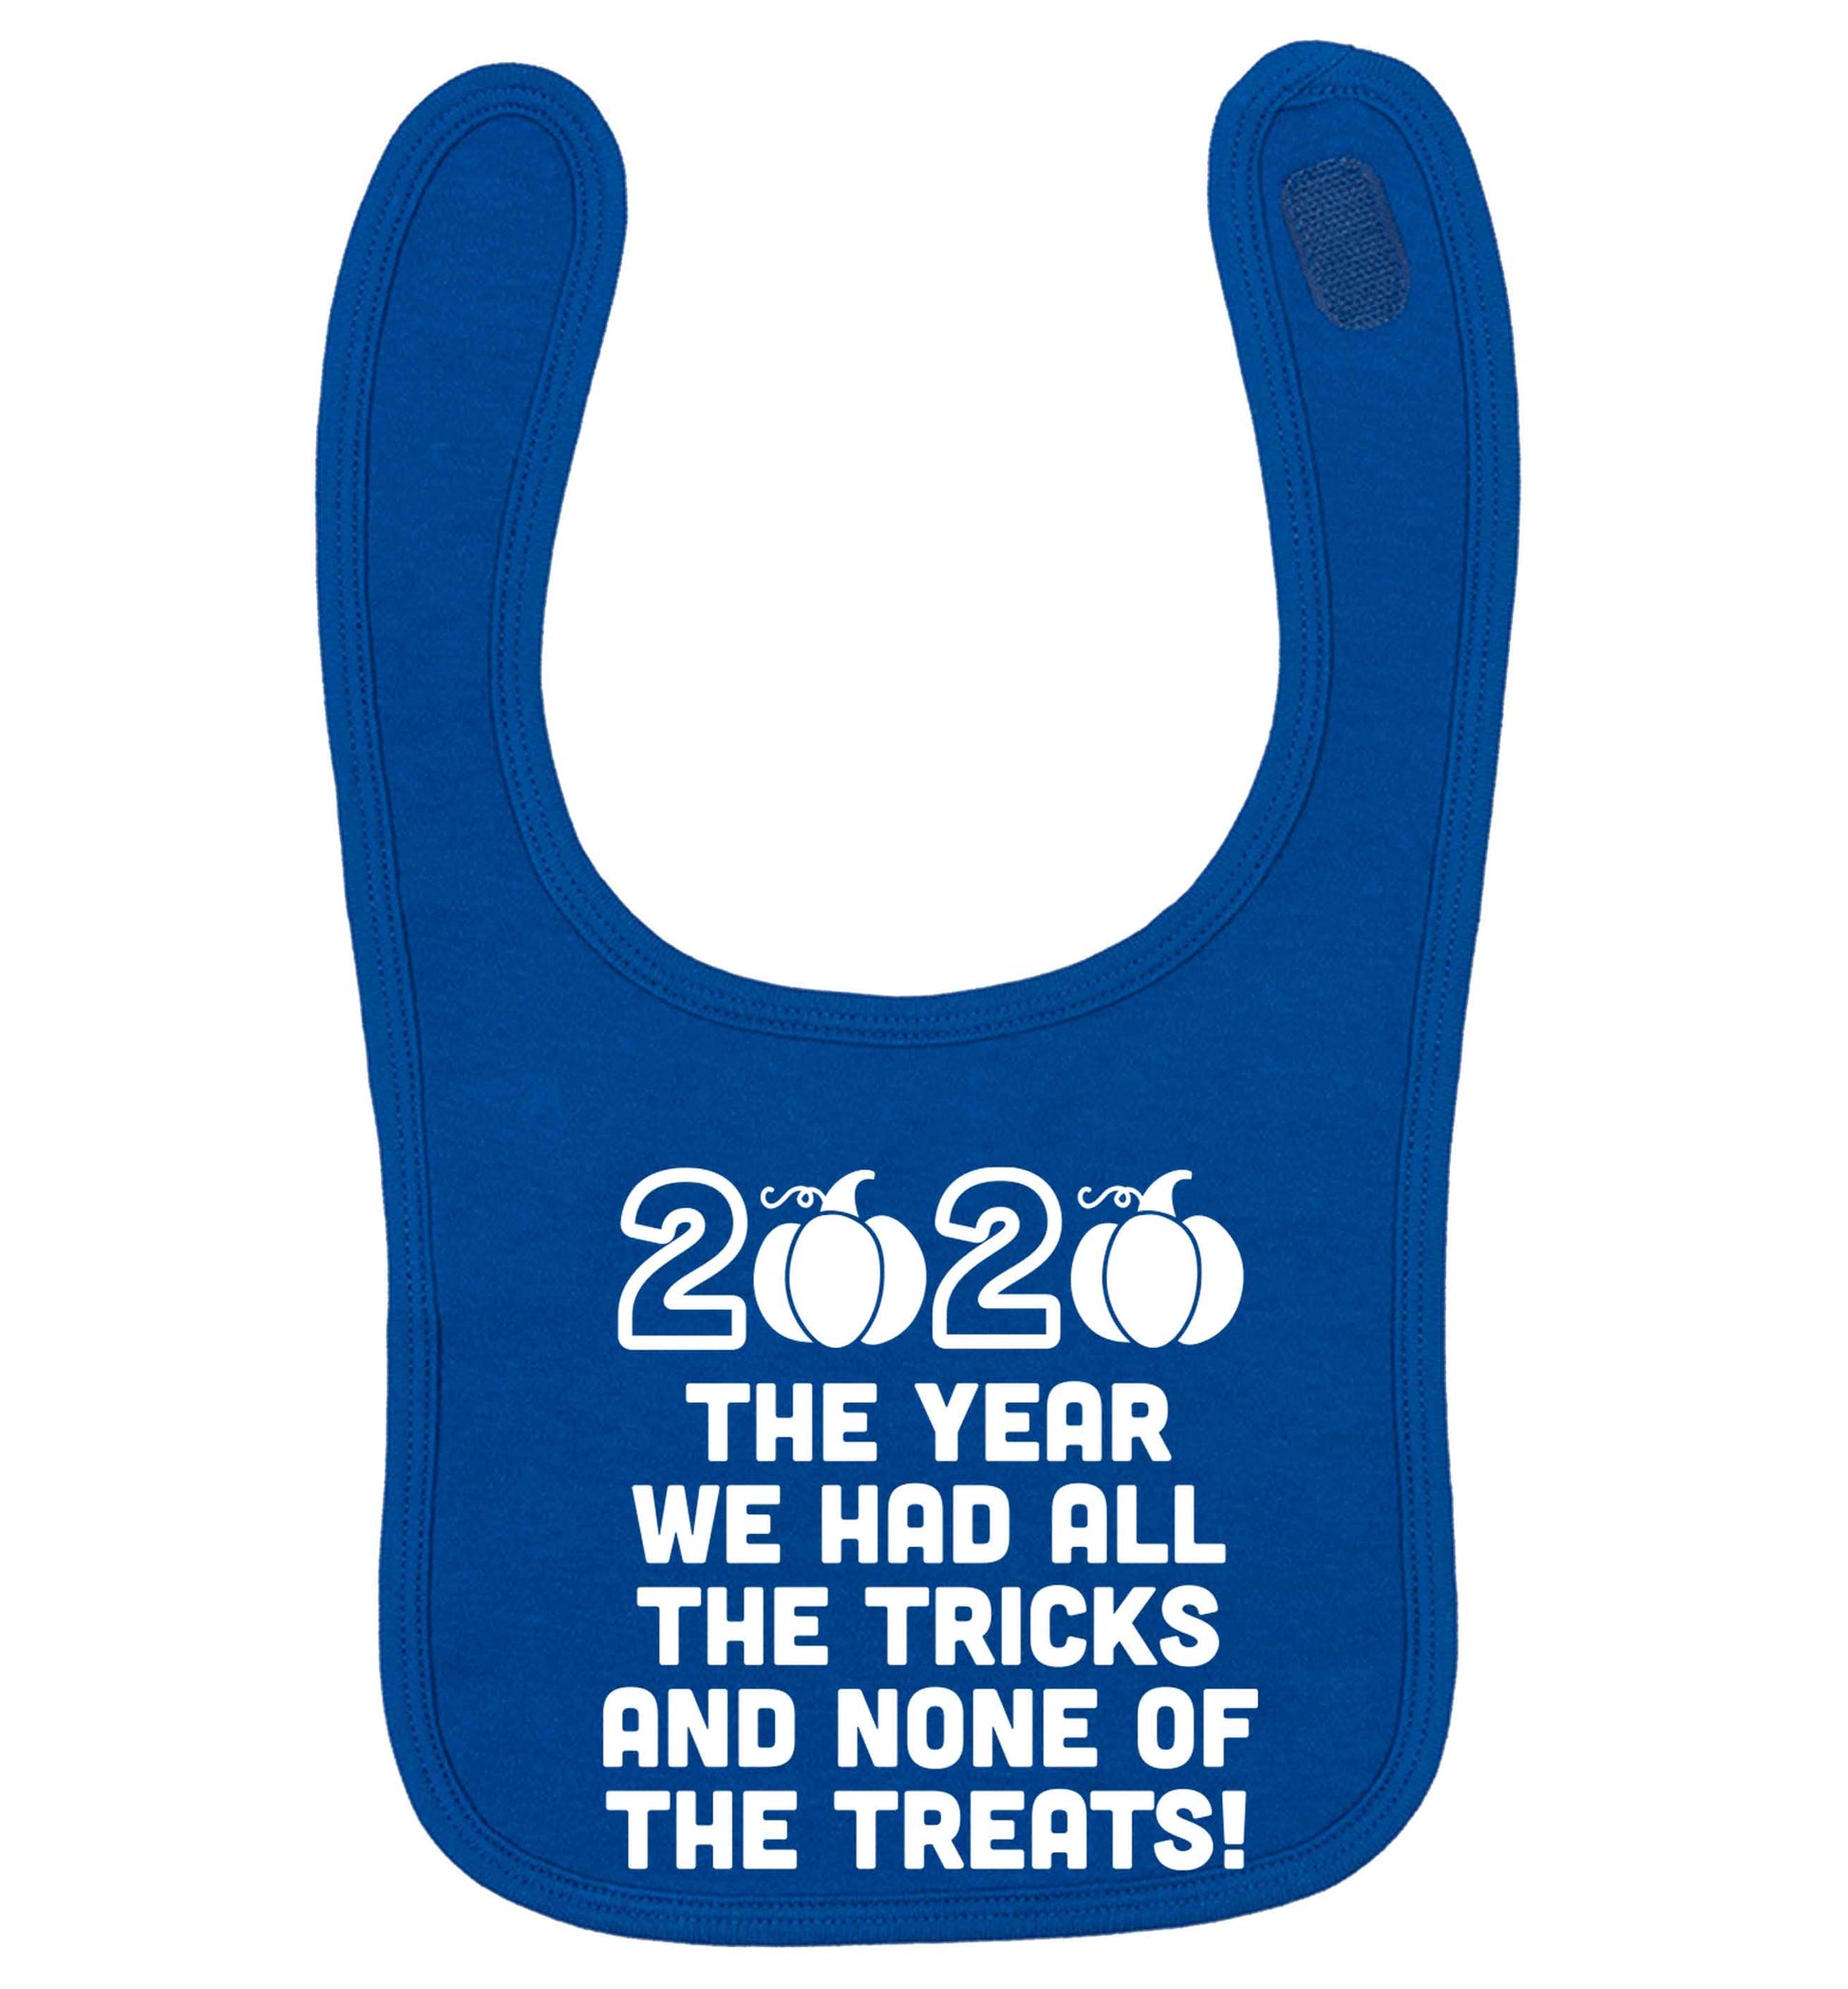 2020 The year we had all of the tricks and none of the treats royal blue baby bib